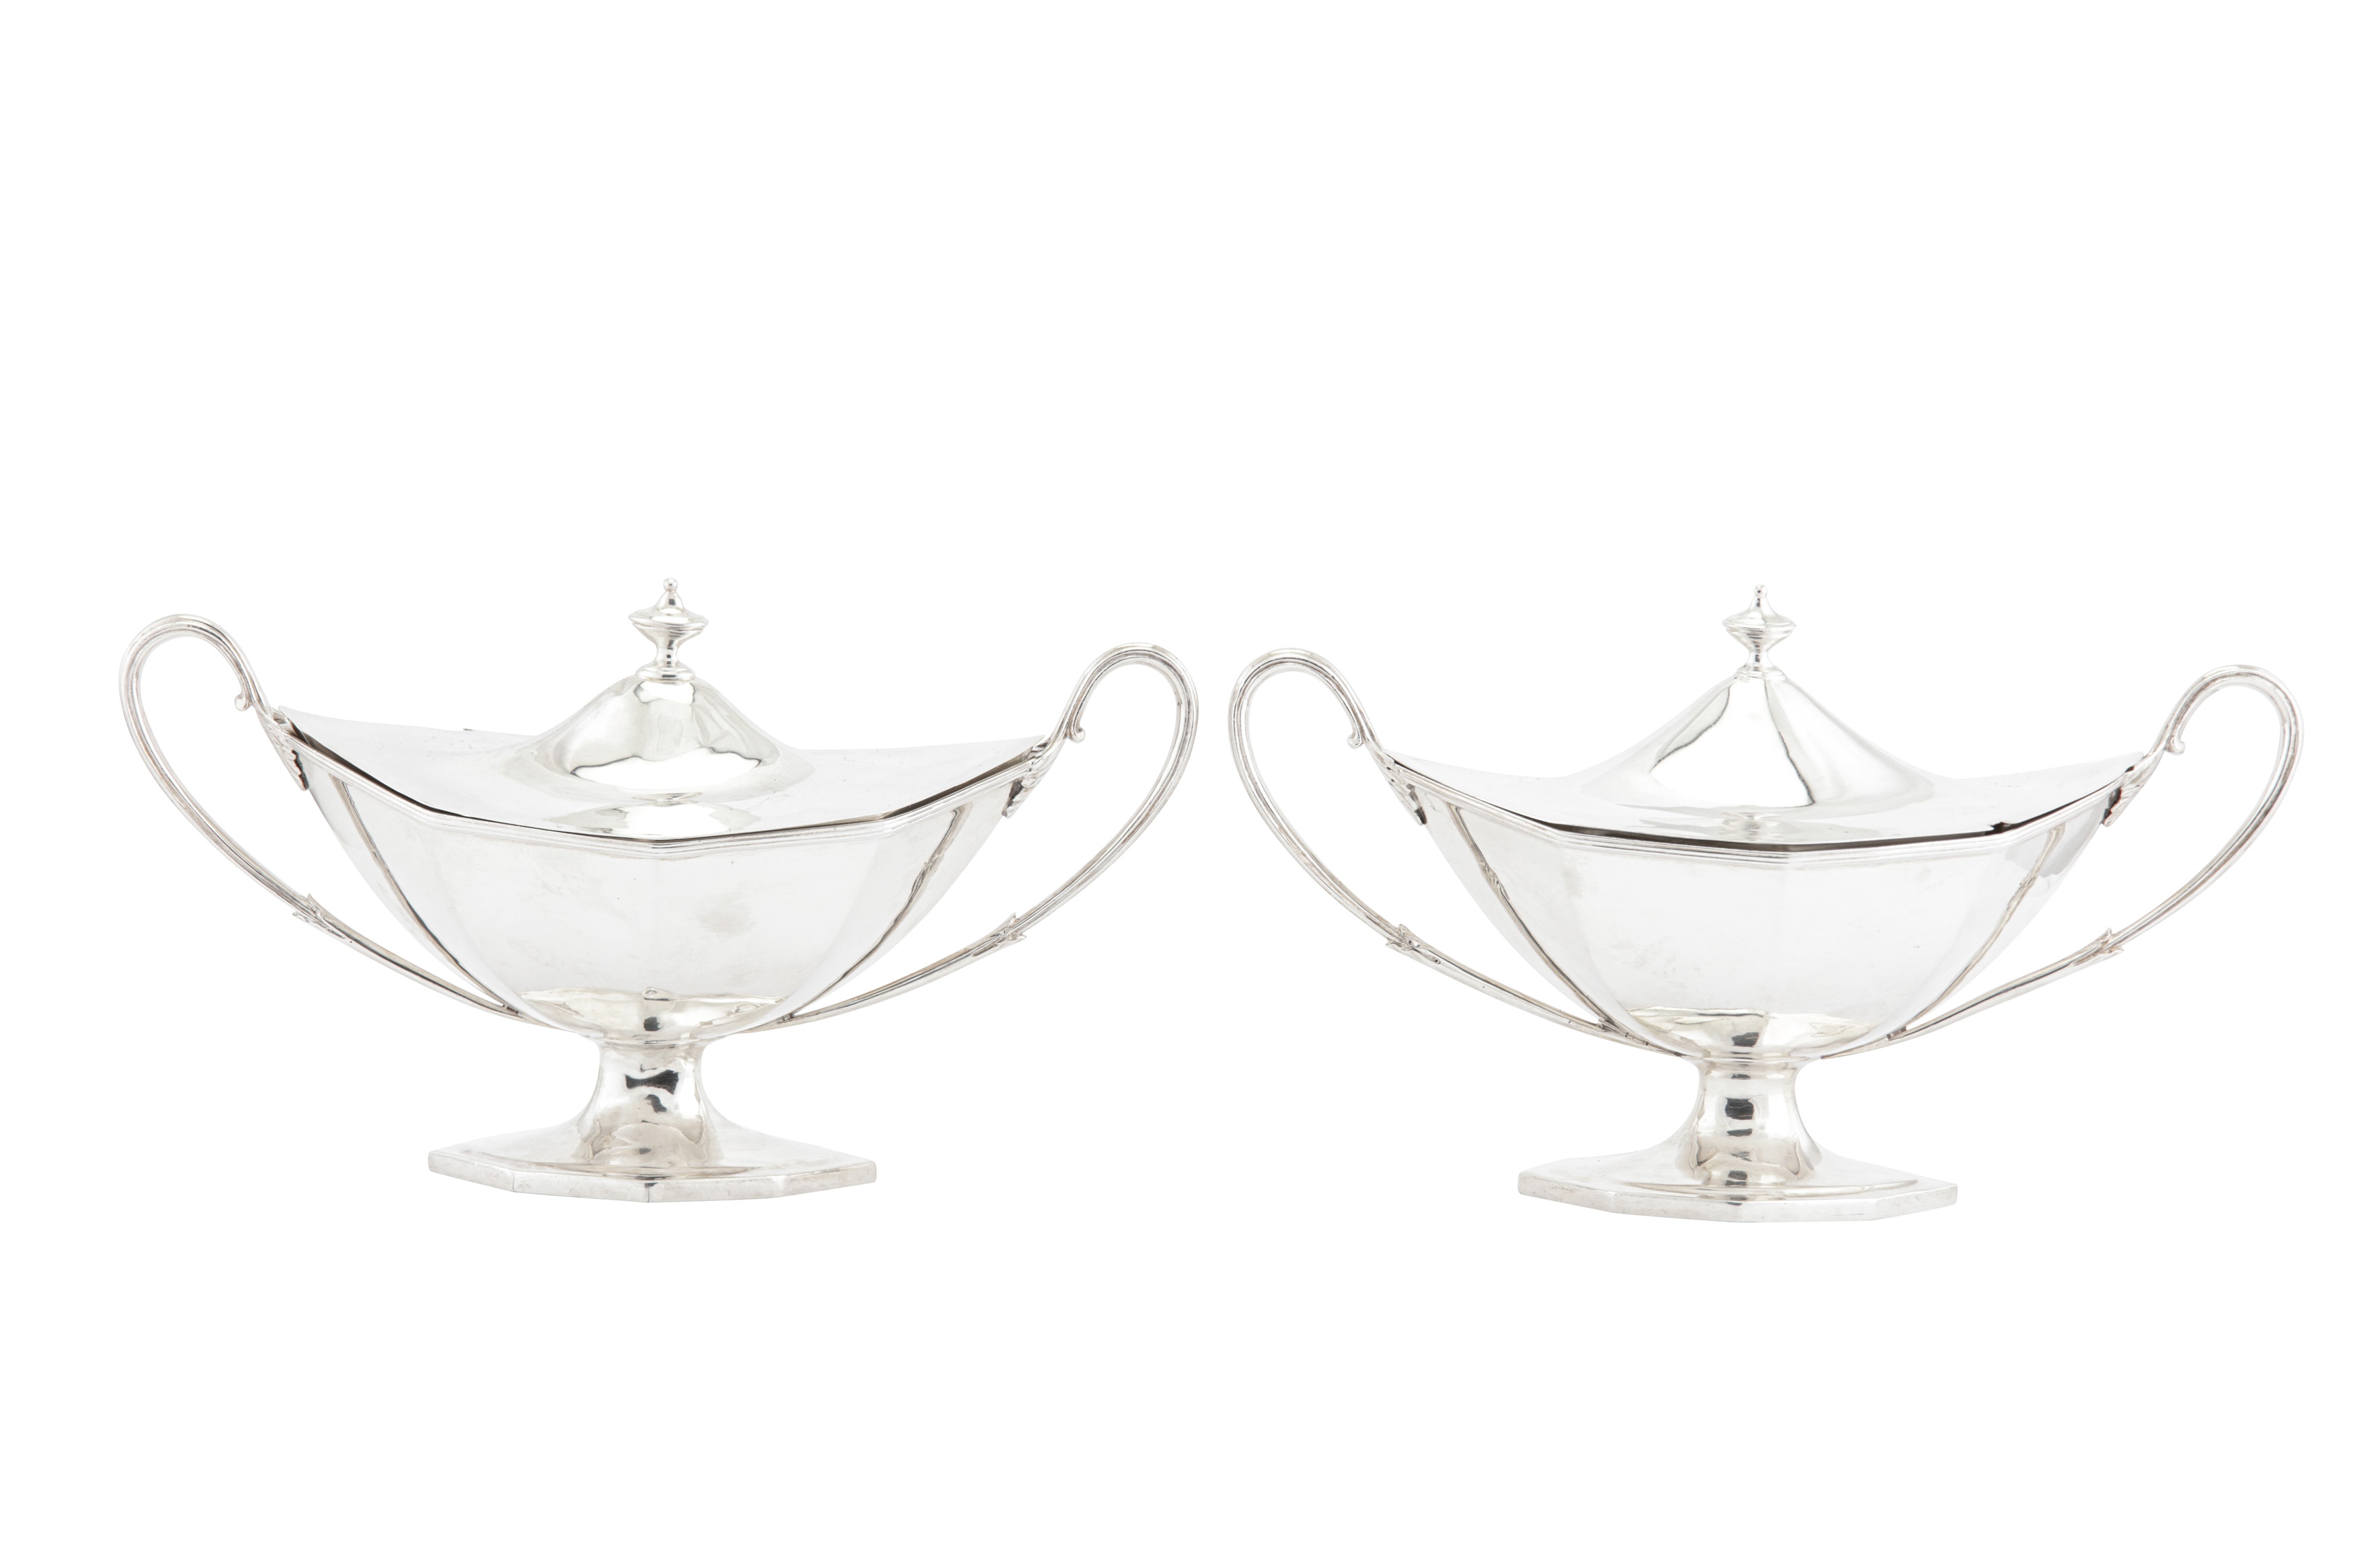 A pair of George III sterling silver sauce tureens, London 1788 by Henry Chawner (reg. 11th Nov